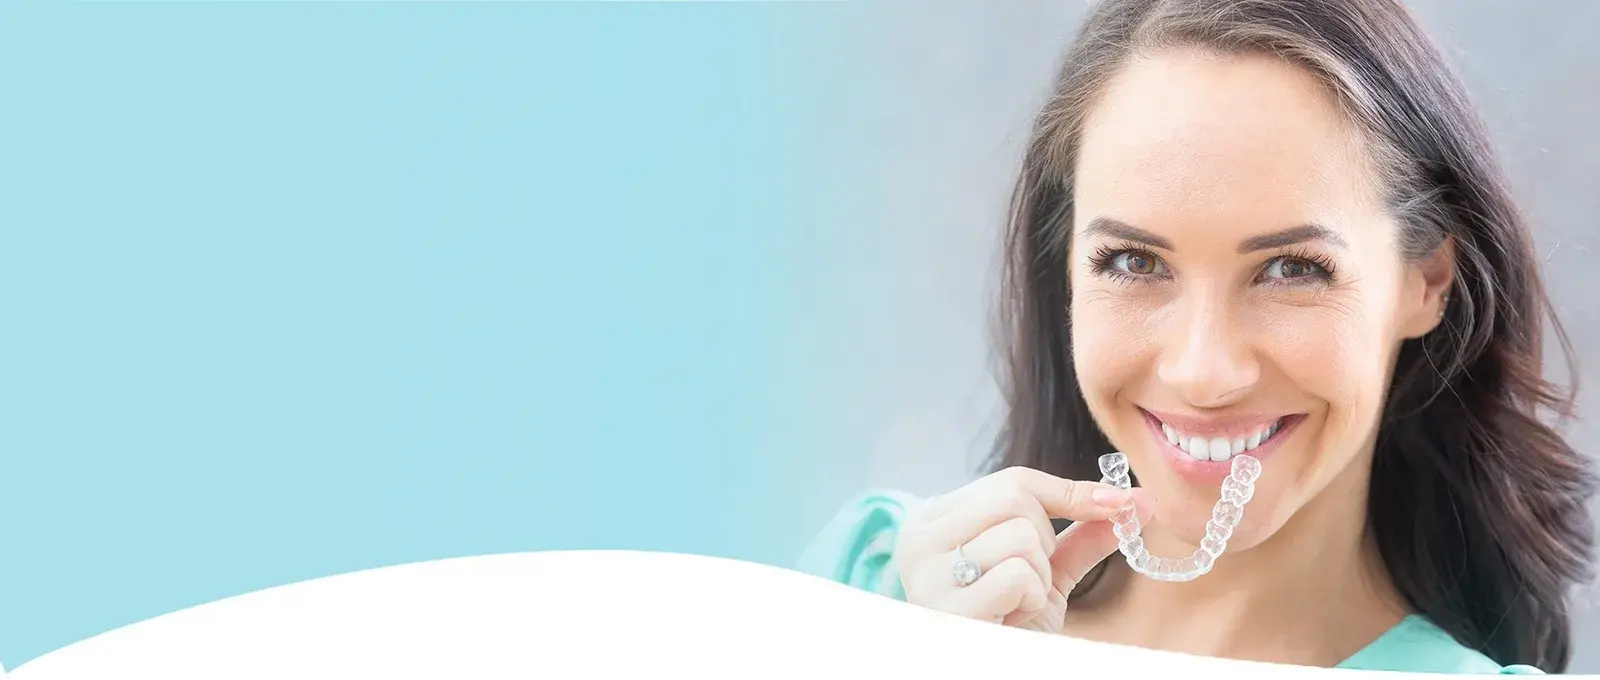 Reclaim your smile with Dentures at West Lynde Dental, Whitby's solution for natural smile